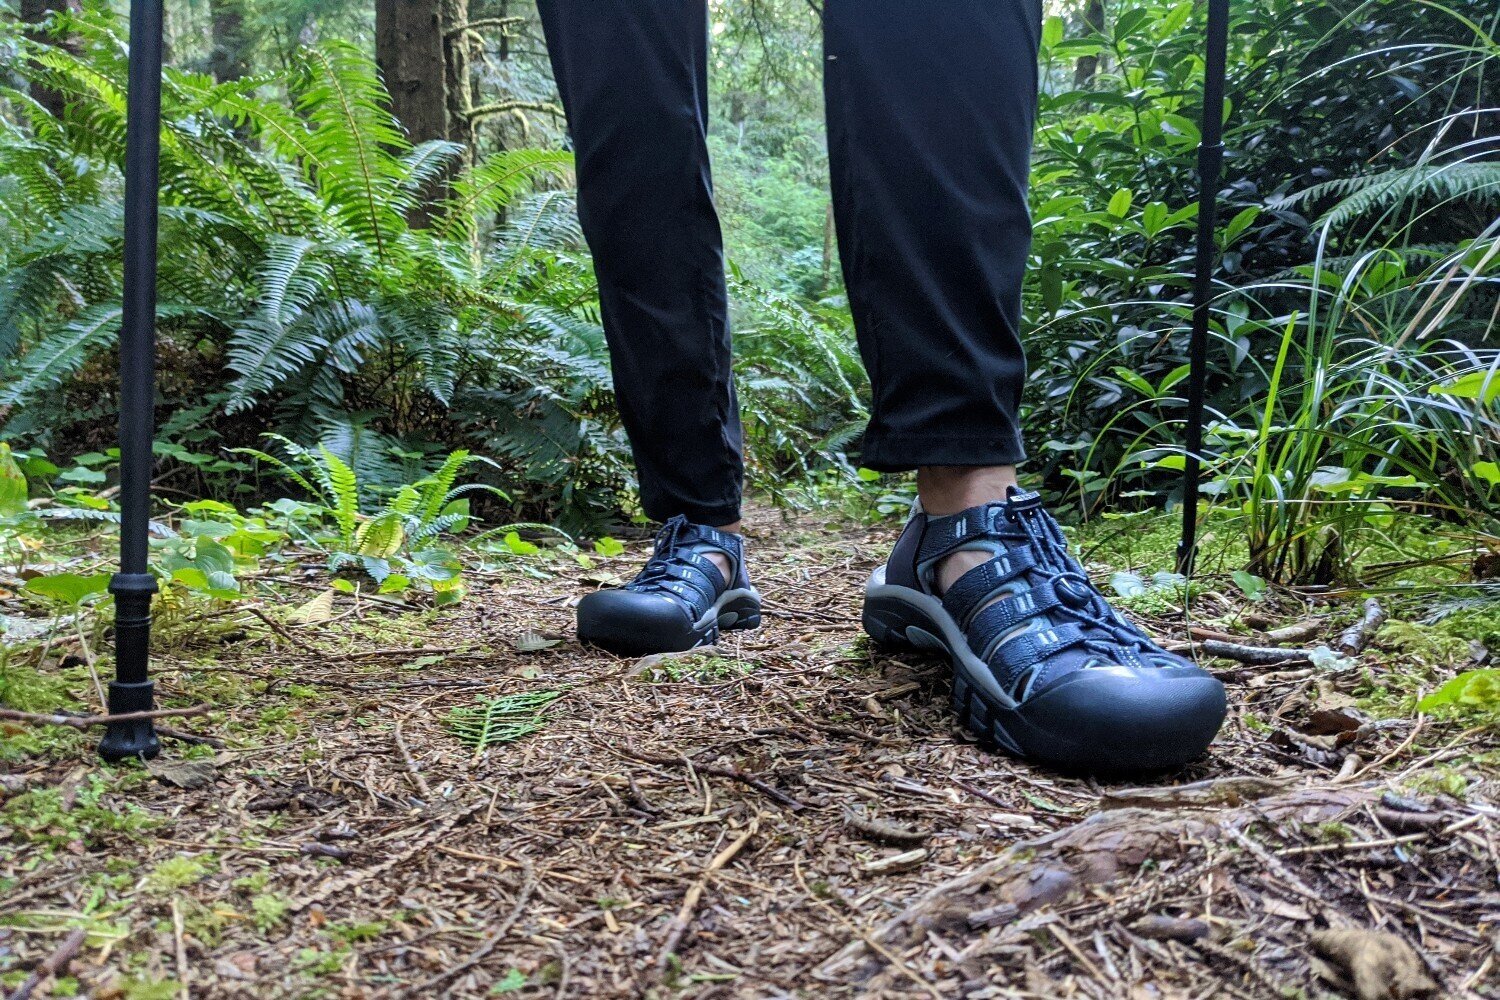 The KEEN Newport H2 are a little heavier and bulkier than many other hiking sandals, but they’re also among the most protective and durable.